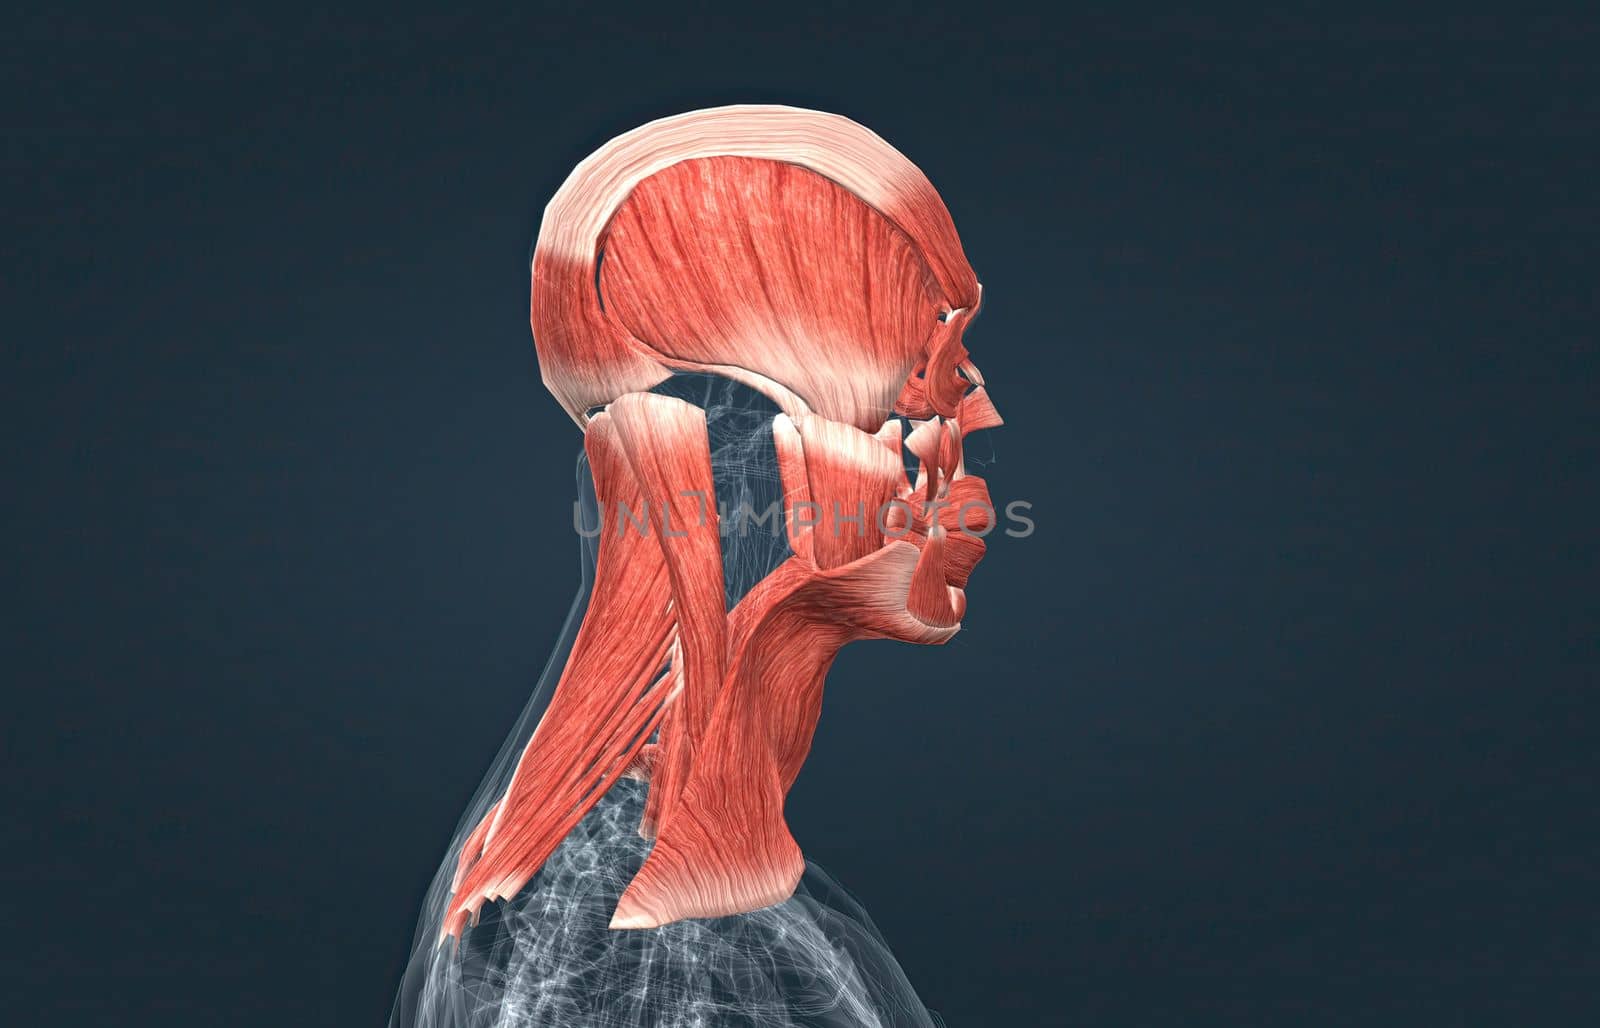 Human anatomy of a male face, neck and shoulder muscle anatomy, medical image of human anatomy 3D illustration